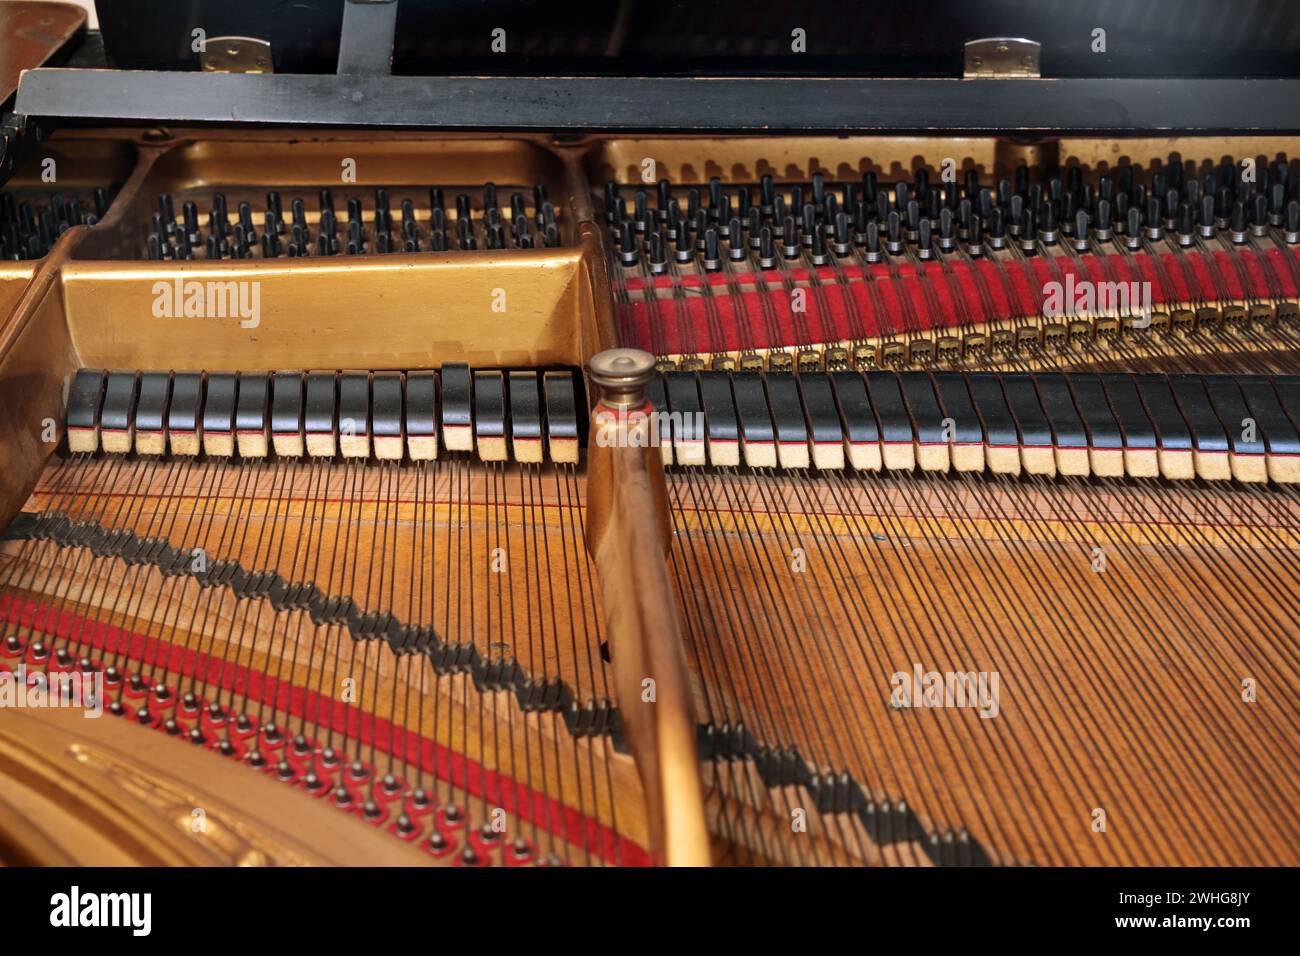 Inside a grand piano with metal frame, strings, hammer and damper, view into the mechanics of an older acoustic musical instrume Stock Photo